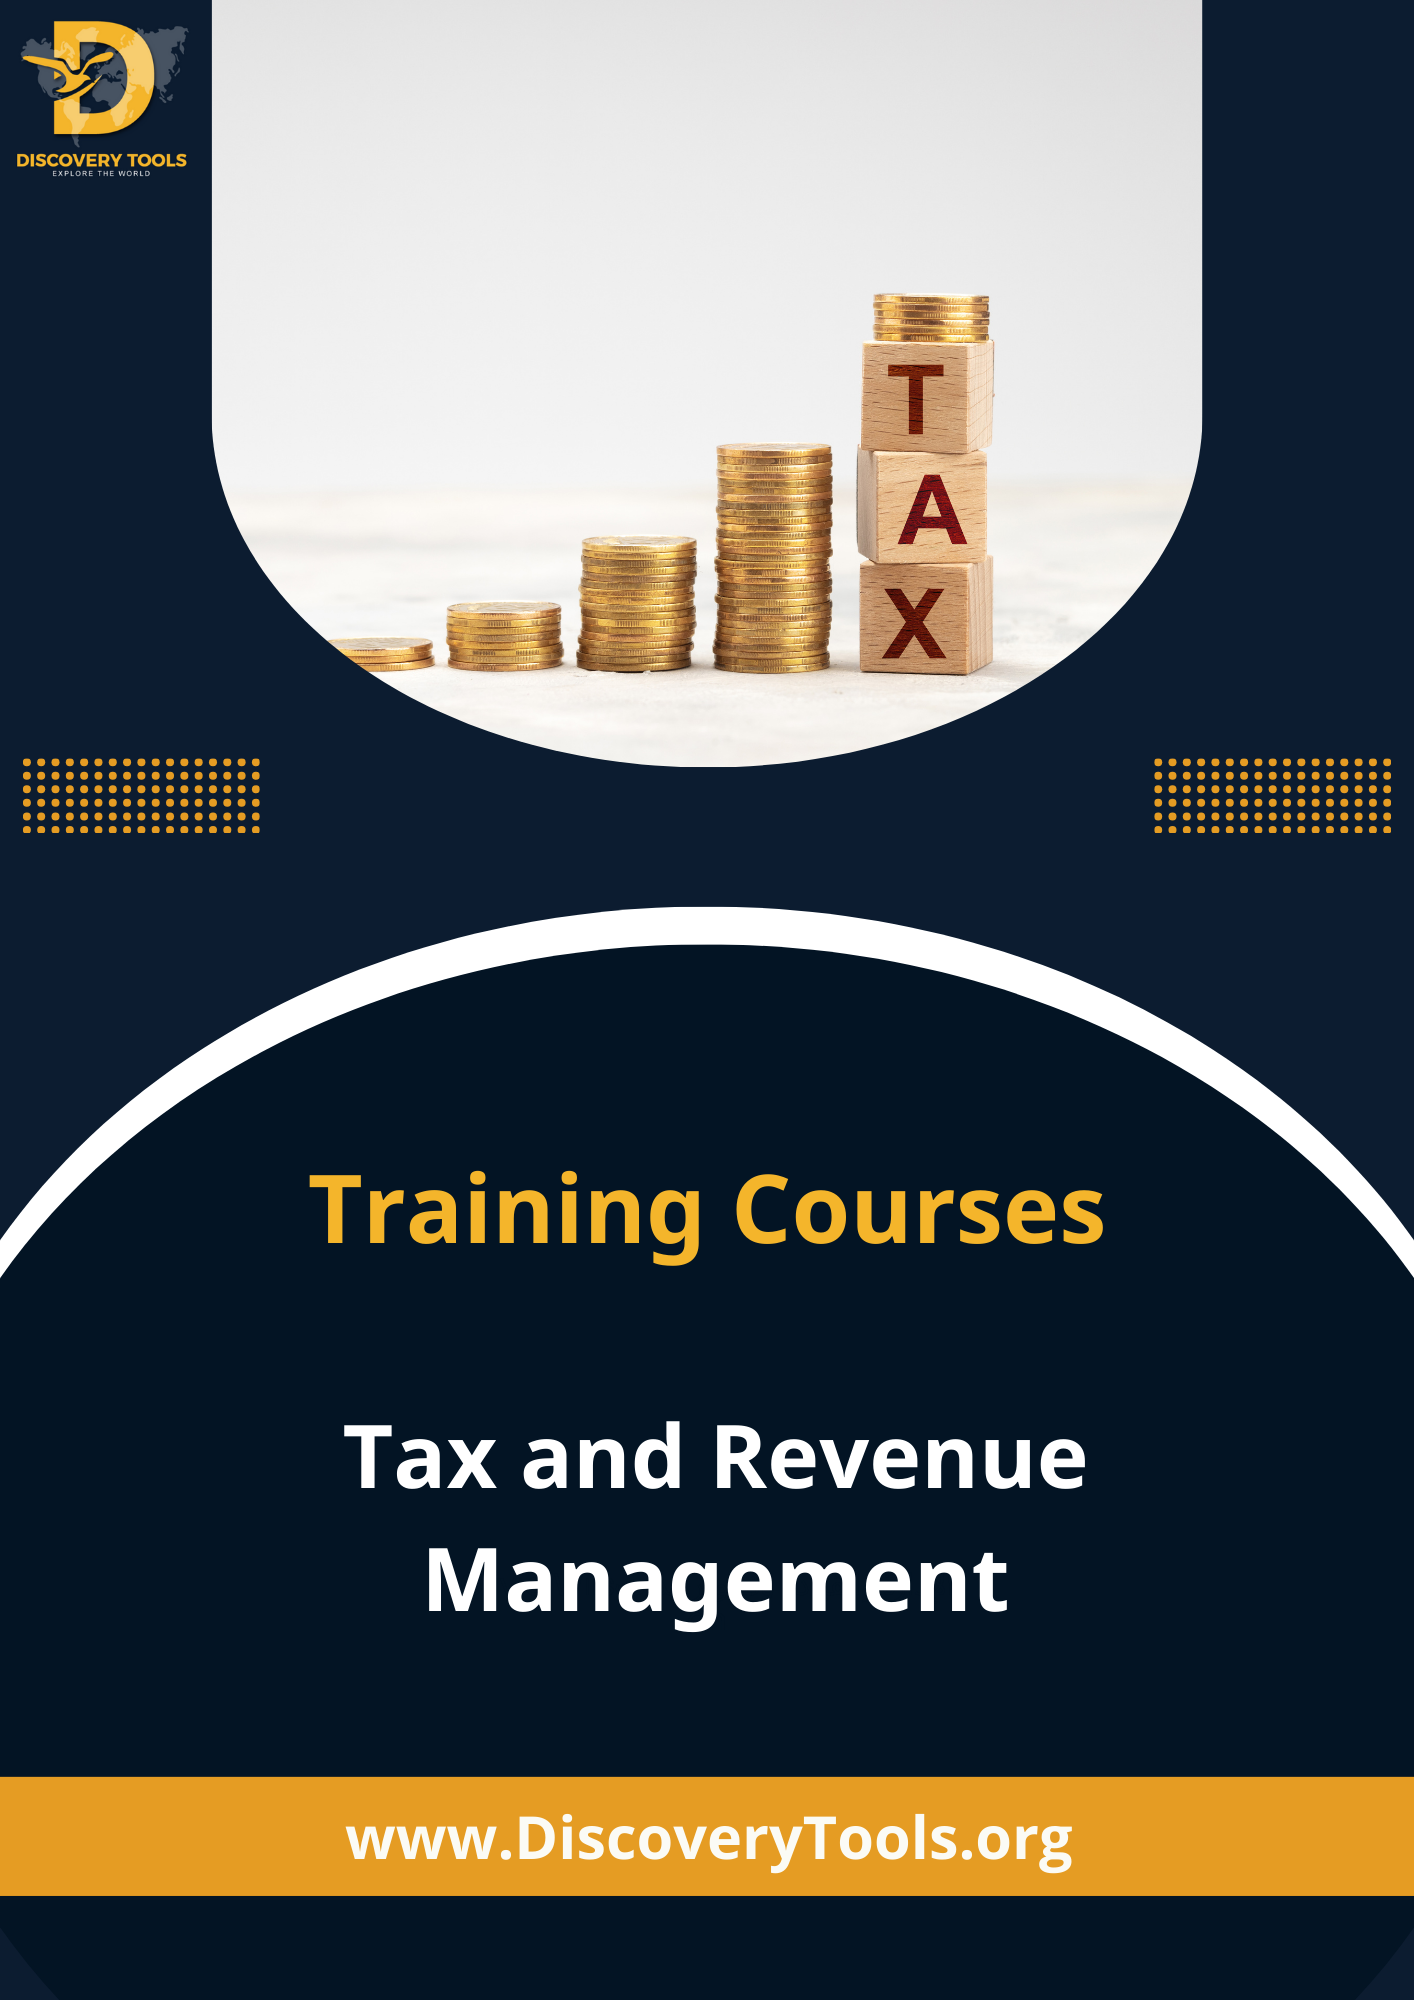 Tax and Revenue Management